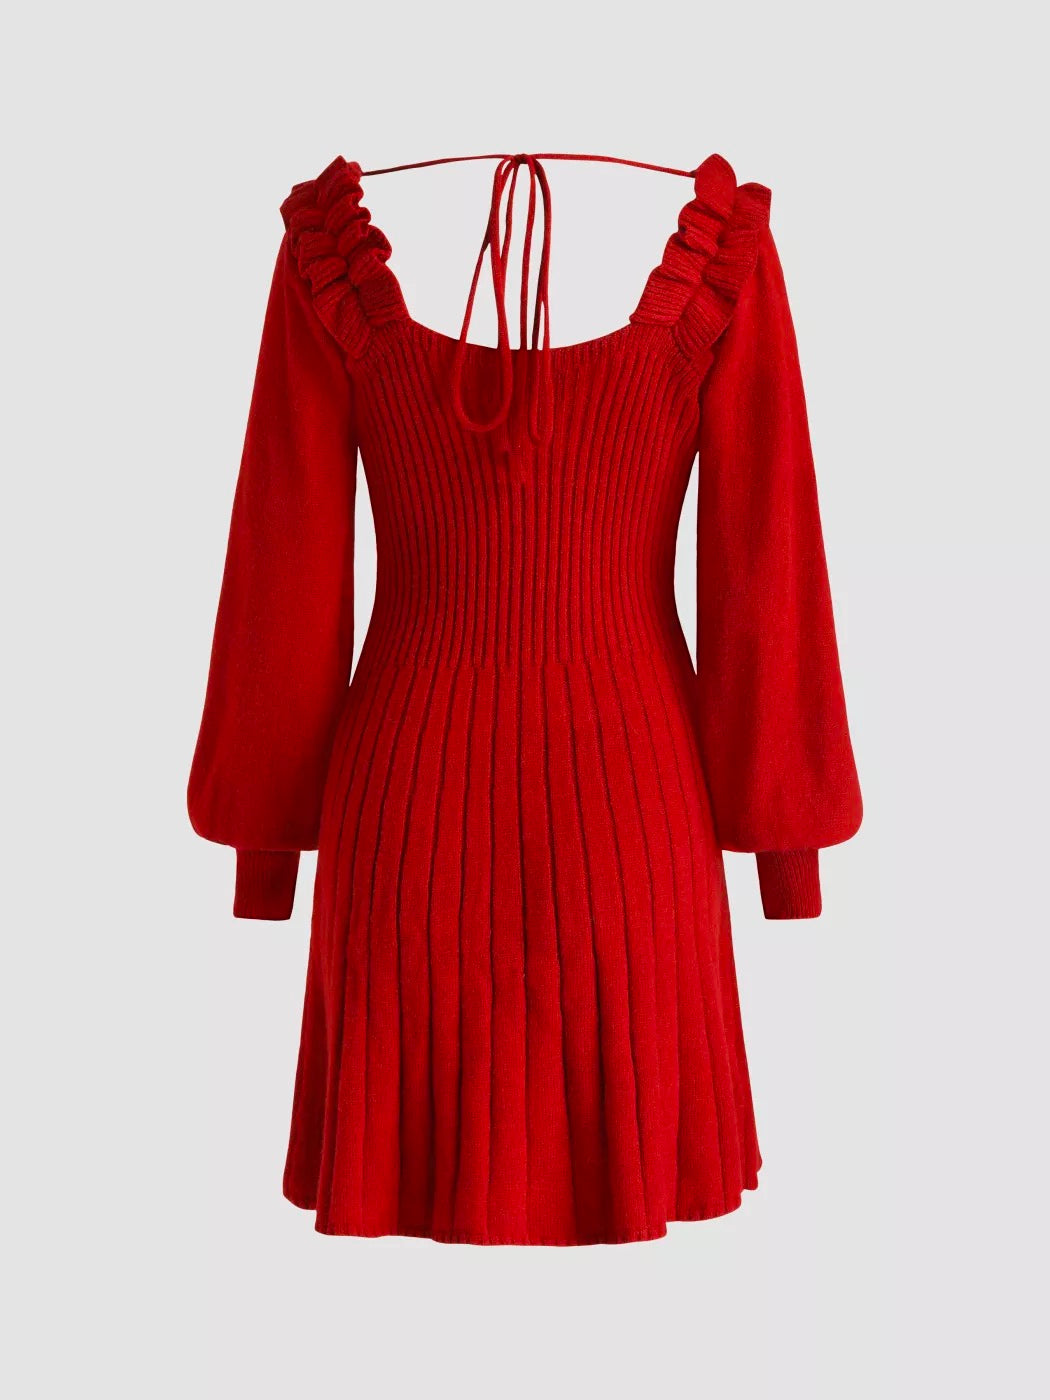 Red Knitted Dress